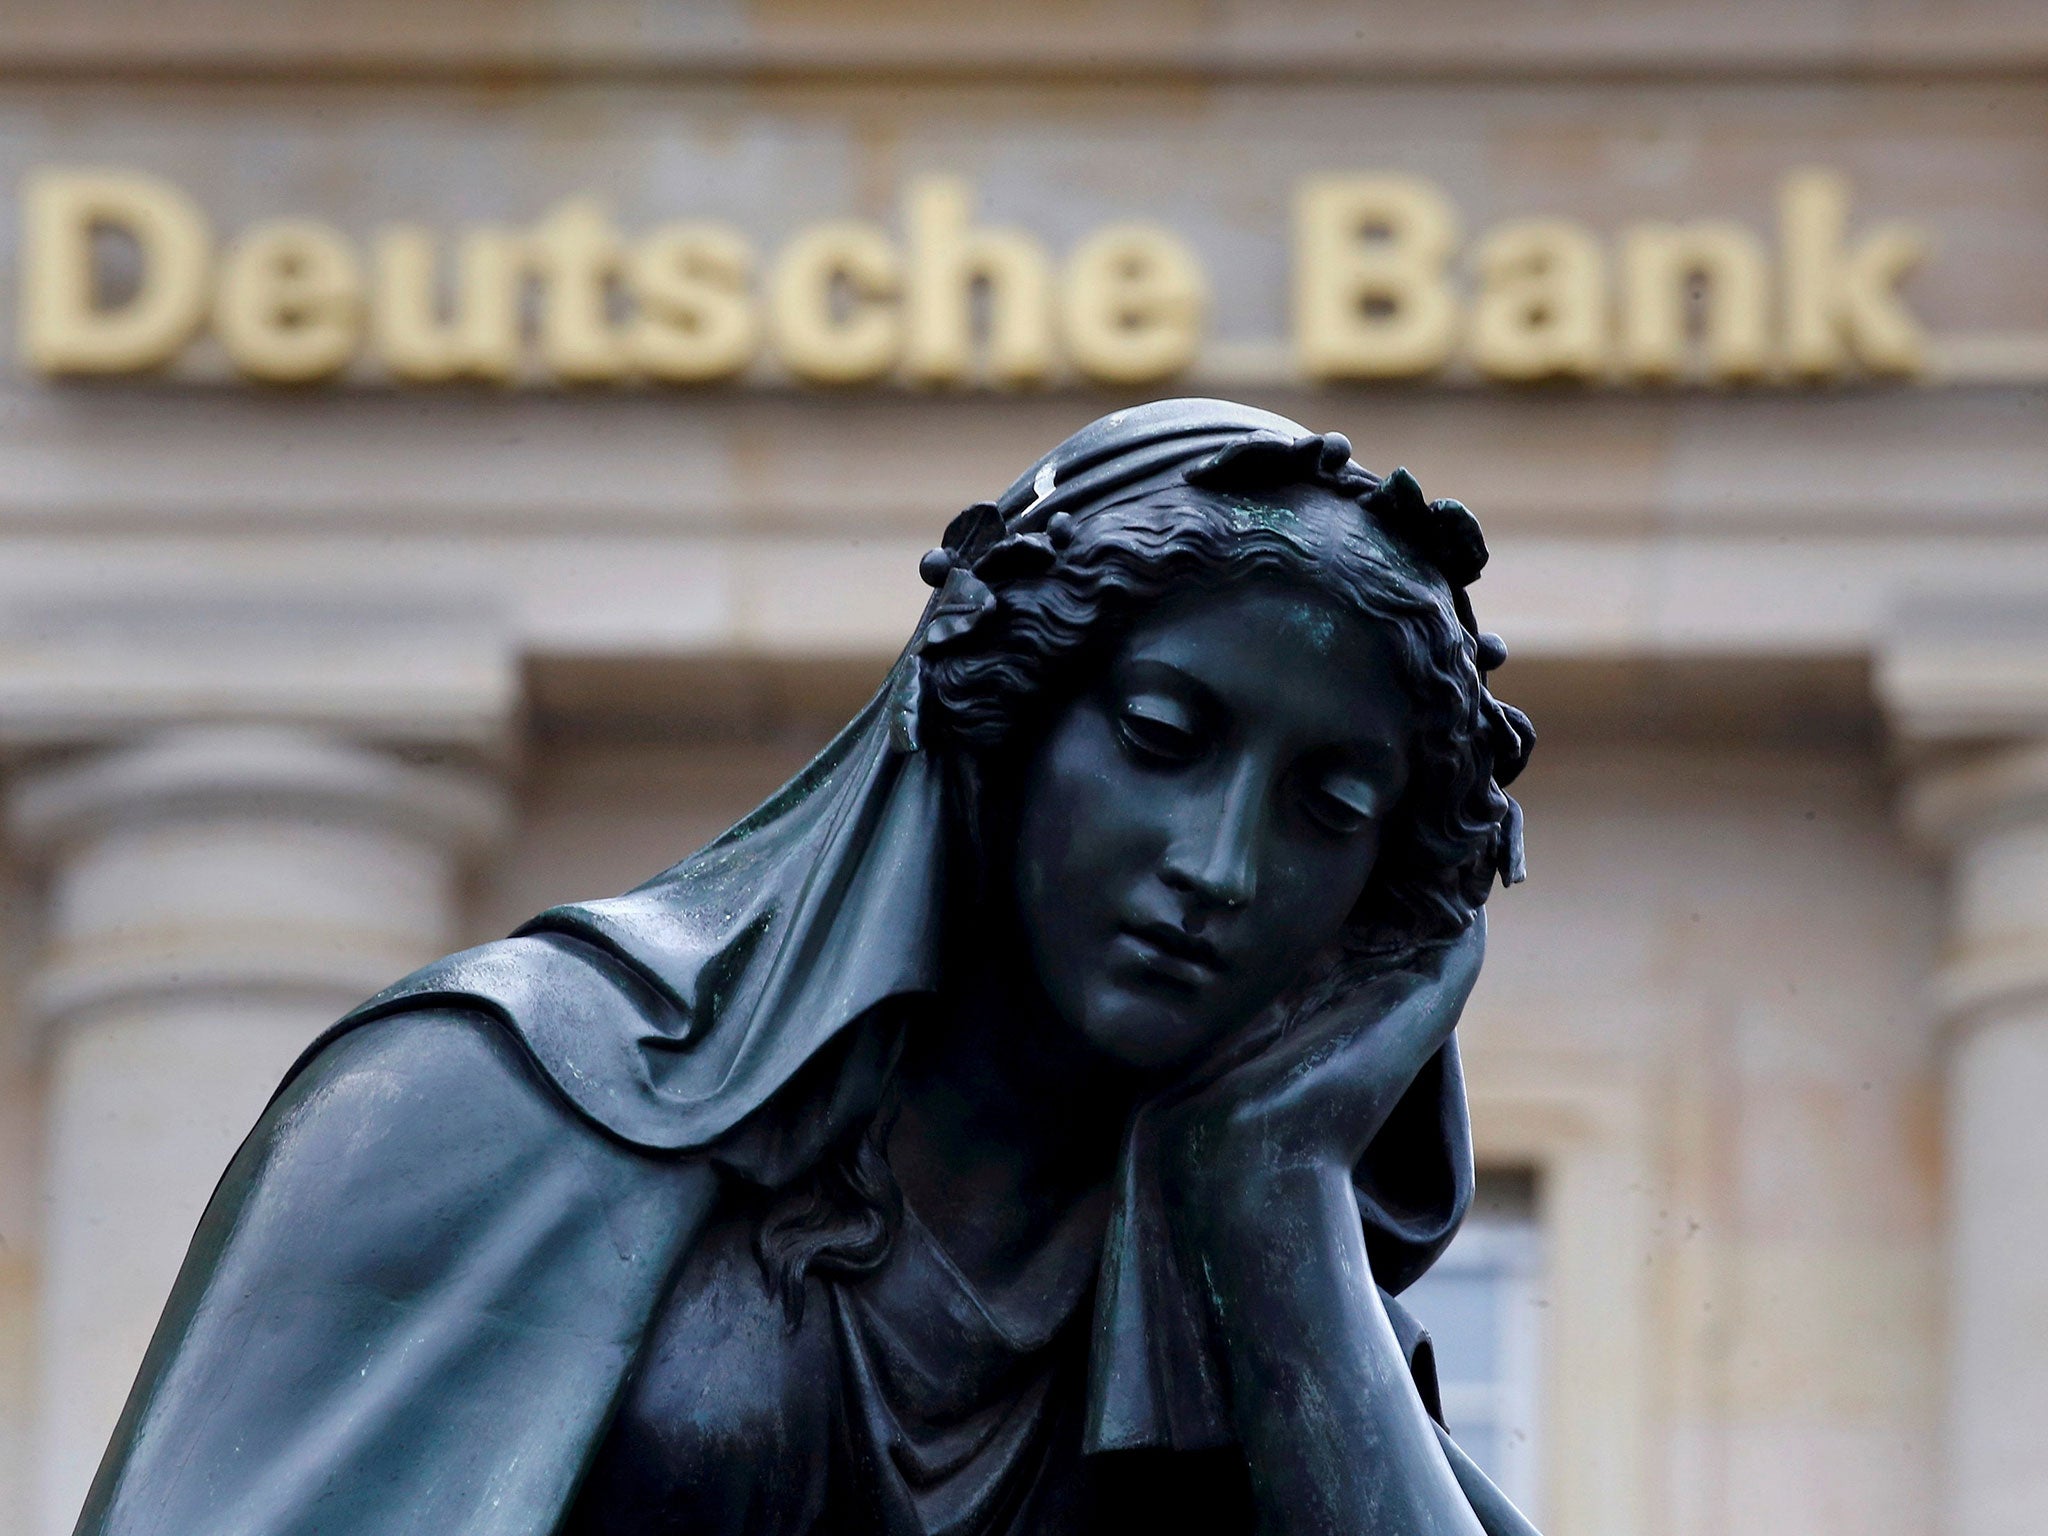 Deutsche Bank has finalised its settlement with the US Department of Justice